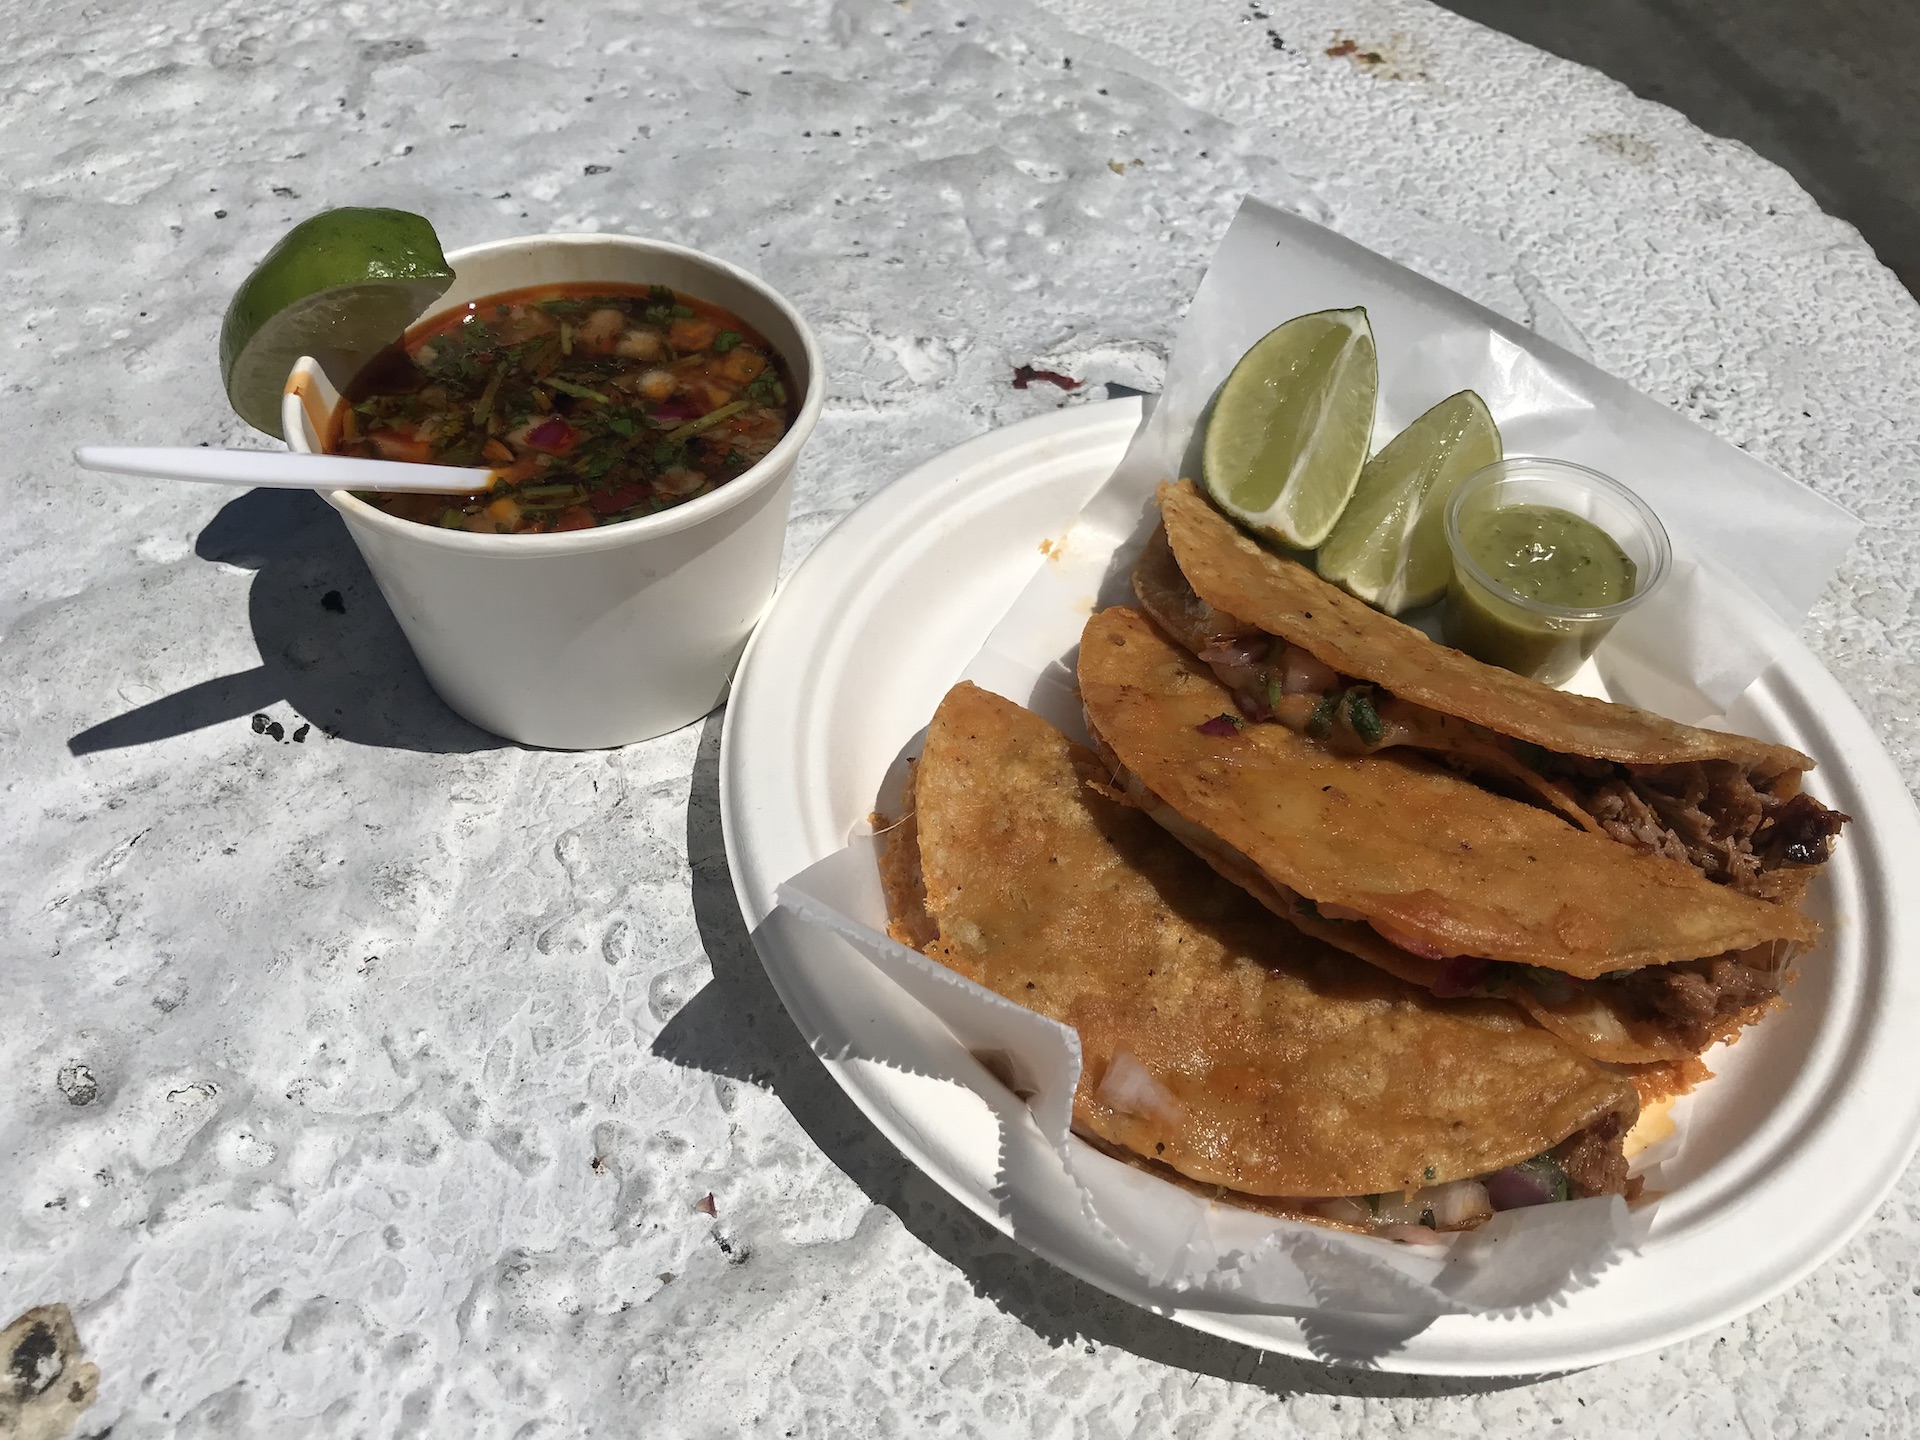 La Santa Torta specializes in Jalisco style birria and consome.